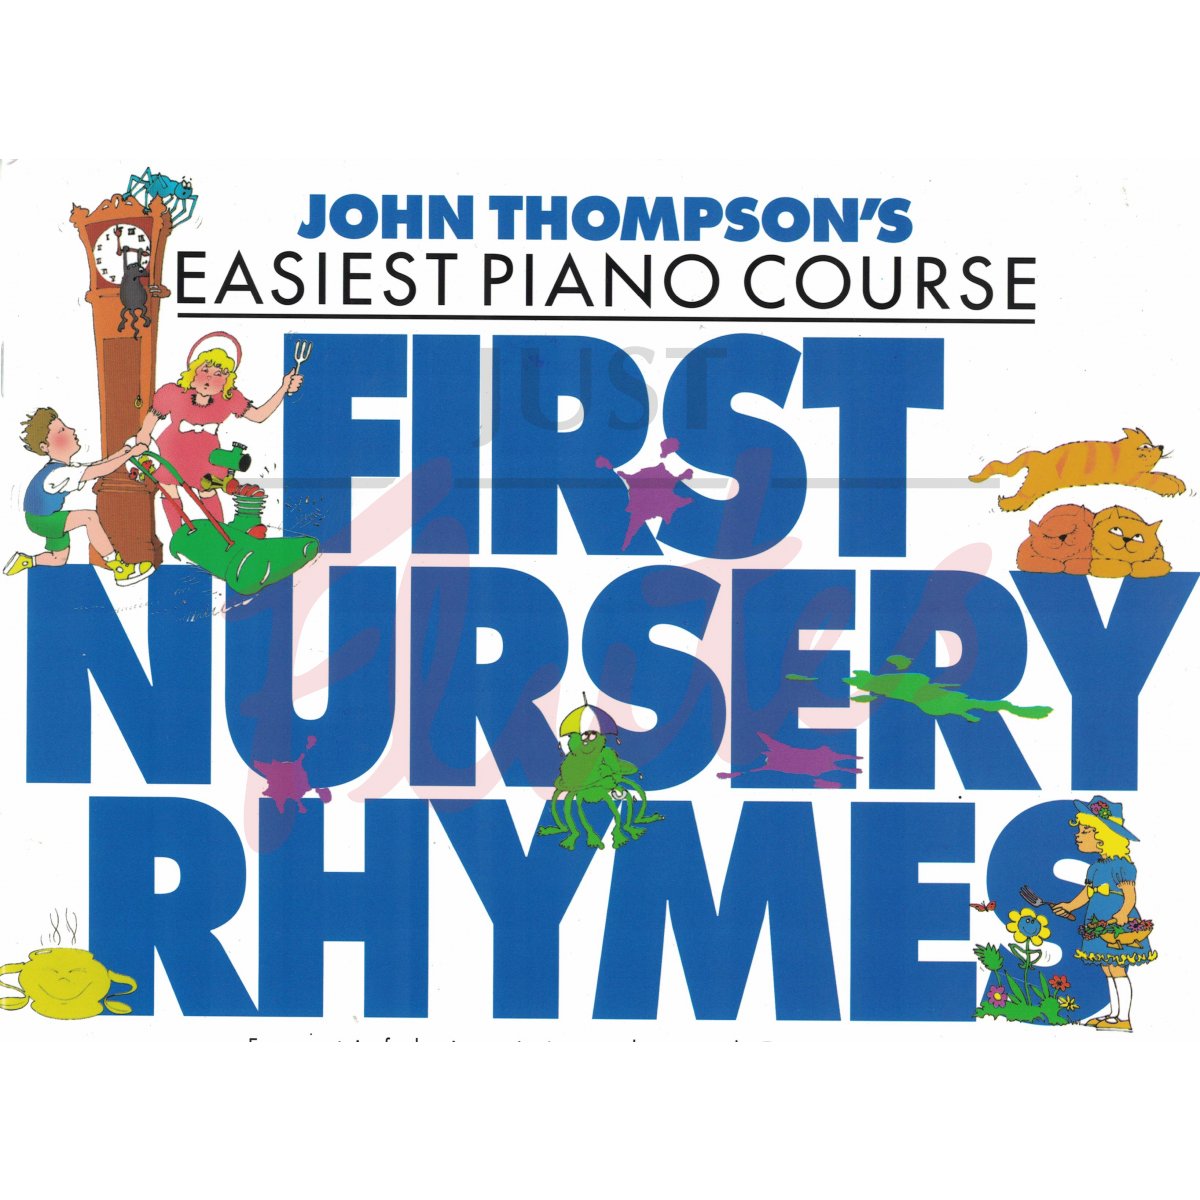 John Thompson's Easiest Piano Course - First Nursery Rhymes